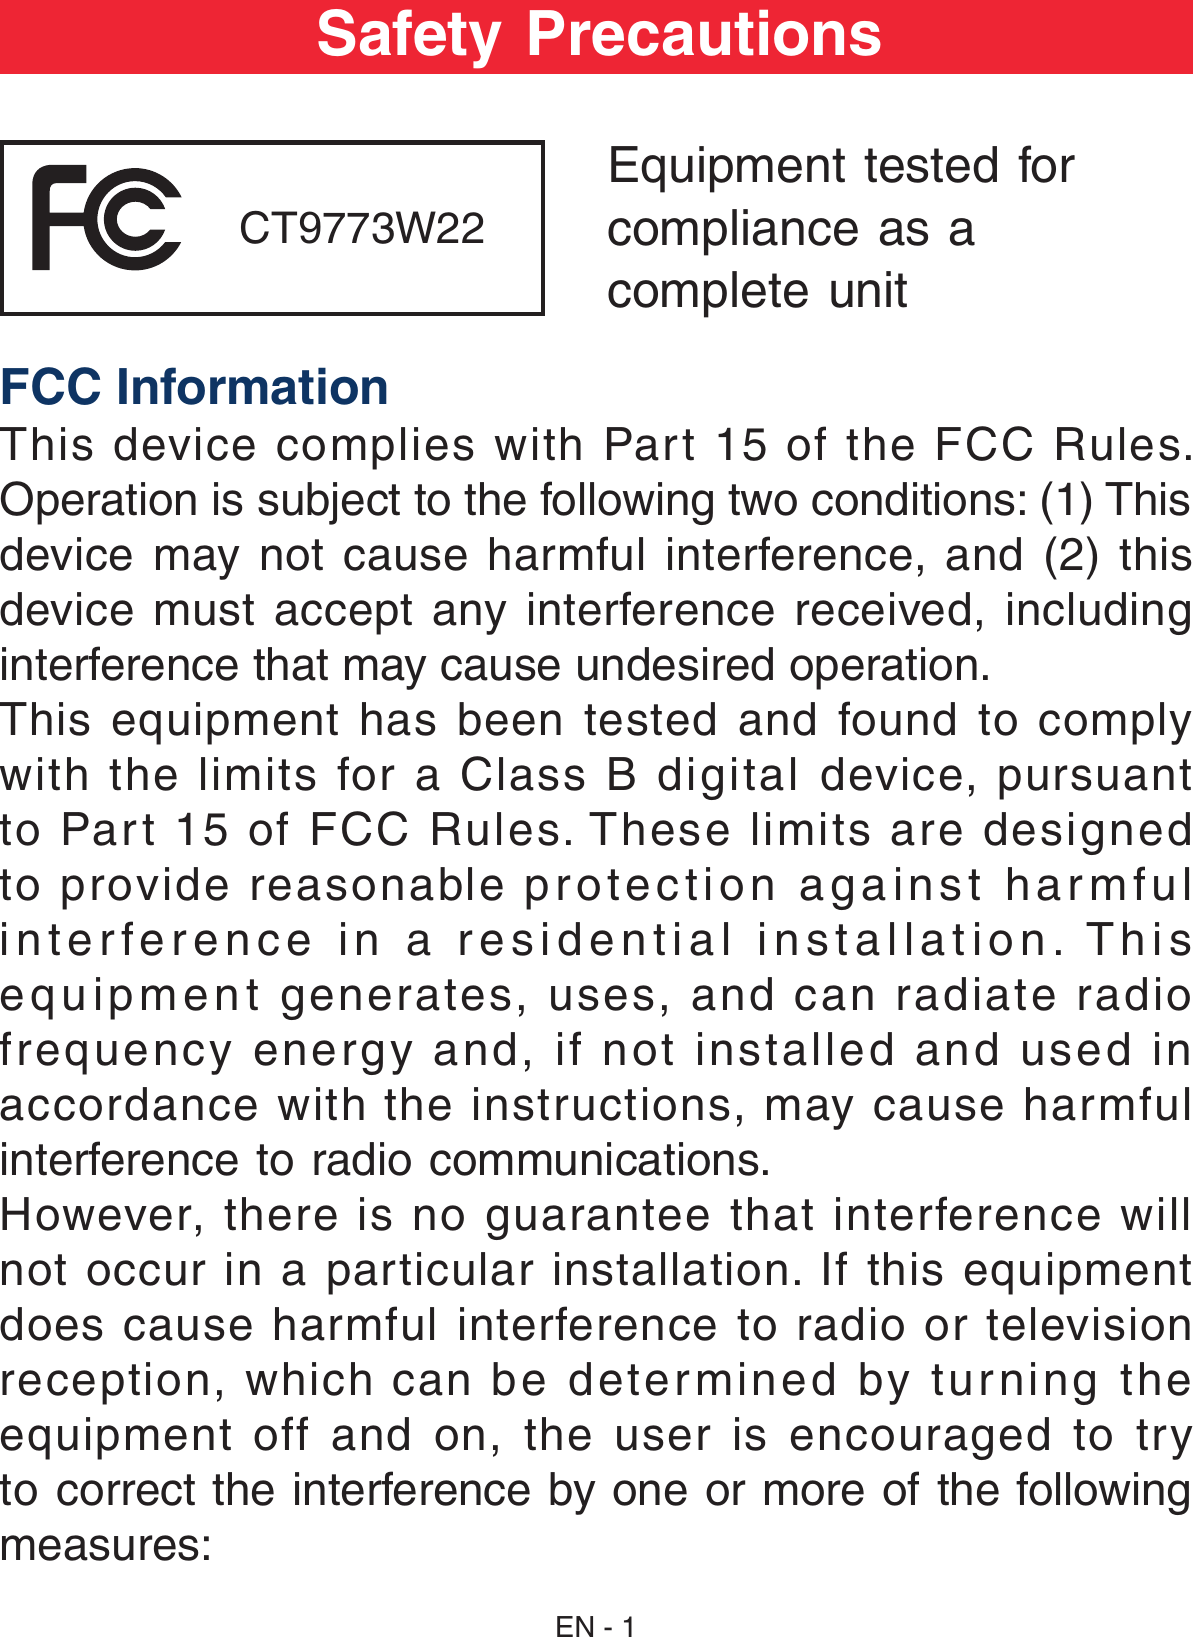 EN - 1Safety PrecautionsEquipment tested forcompliance as acomplete unit FCC InformationThis device complies with Part 15 of the FCC Rules. Operation is subject to the following two conditions: (1) This device may not  cause harmful  interference,  and  (2) this device  must  accept  any  interference  received,  including interference that may cause undesired operation.This equipment has been tested and found to comply with  the  limits  for  a  Class  B  digital  device,  pursuant to Part 15 of FCC Rules. These limits are designed to provide reasonable protection against harmful interference in a residential installation. This equipment generates, uses, and can radiate radio frequency energy and, if not installed and used in accordance with the instructions, may cause harmful interference to radio communications.However, there is no guarantee that interference will not occur in a particular installation. If this equipment does cause harmful interference to radio or television reception,  which  can  be  determined  by  tur ning  the equipment off and on, the user is encouraged to try to correct the interference by one or more of the following measures:   CT9773W22